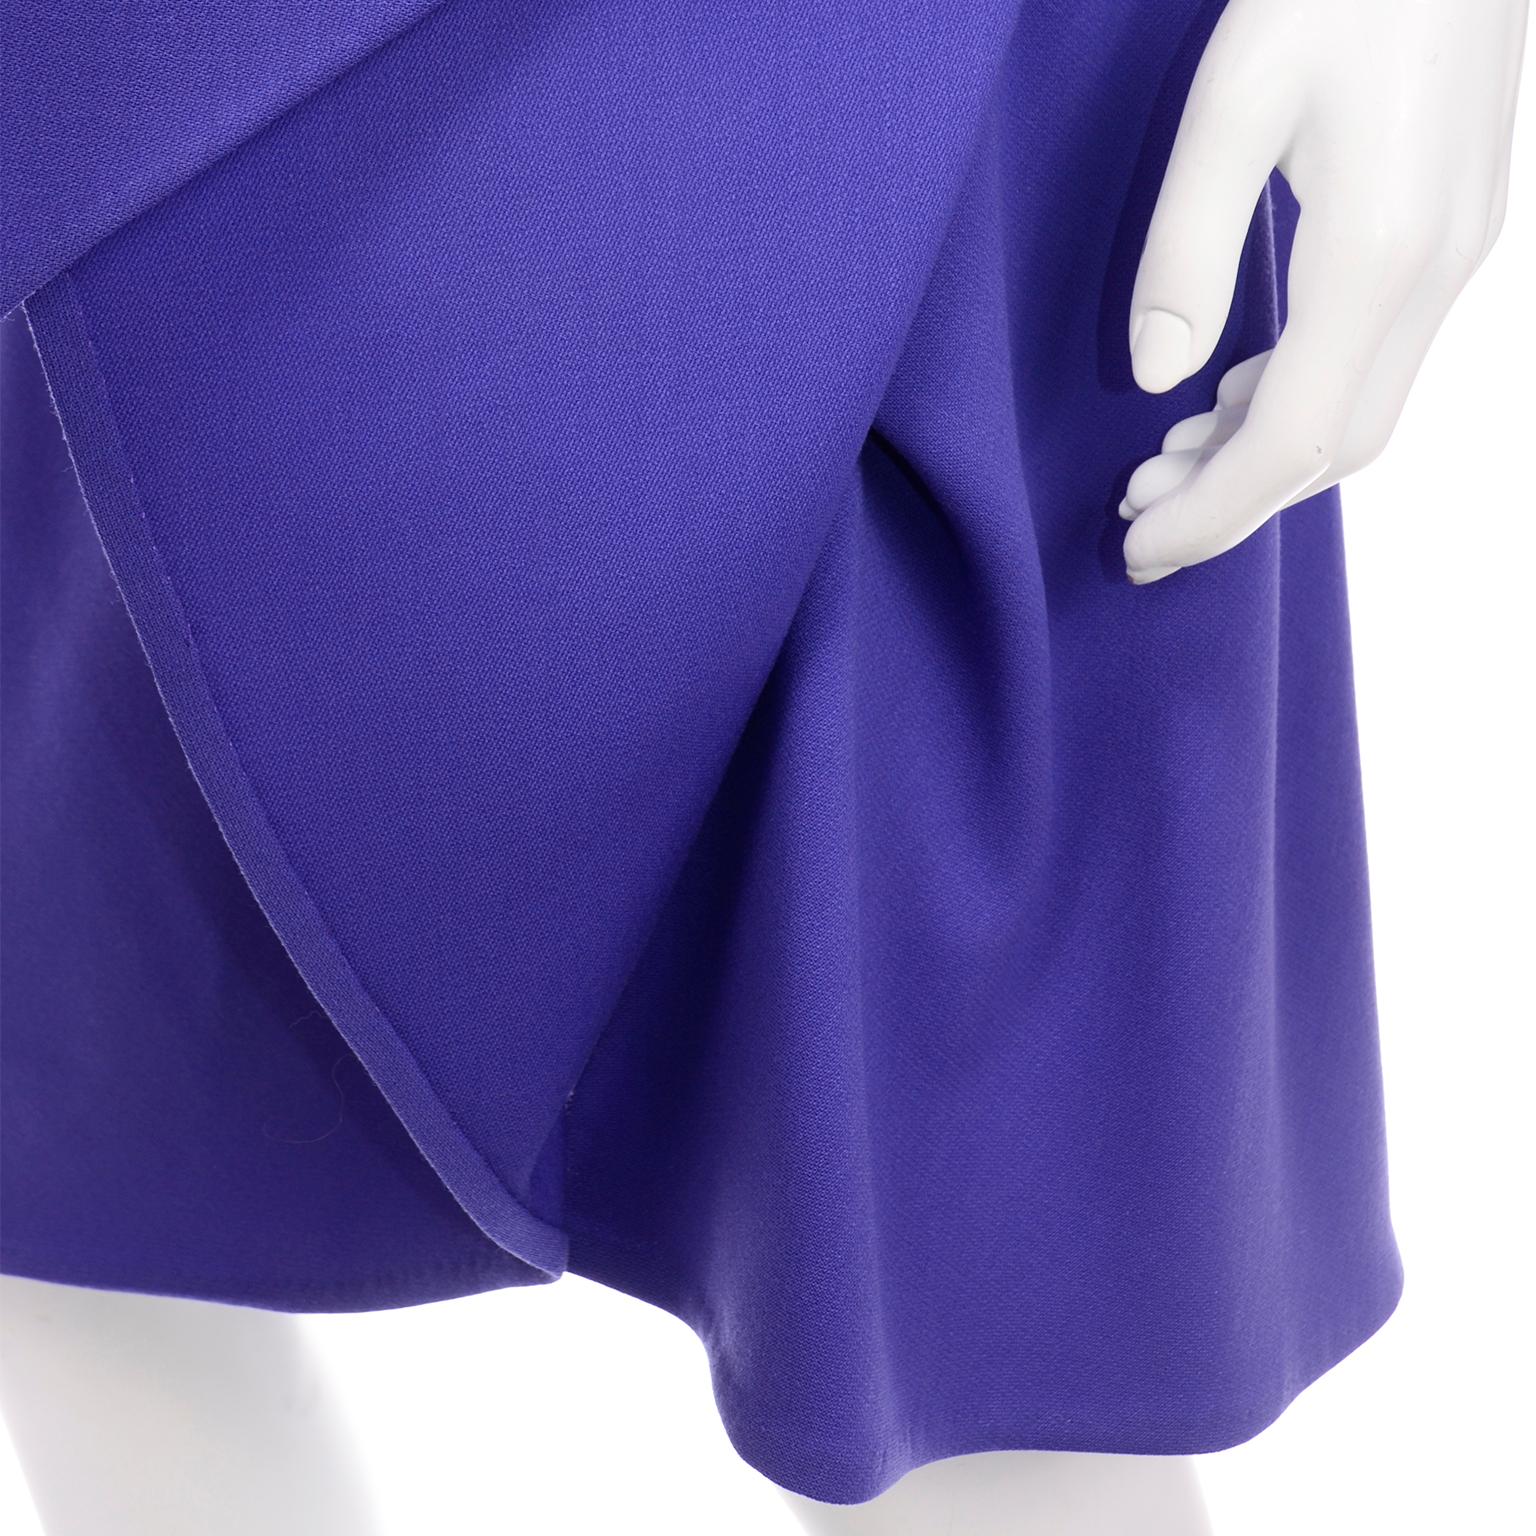 1970s Halston Vintage Purple Jersey Dress  W Asymmetrical Hem In Excellent Condition For Sale In Portland, OR